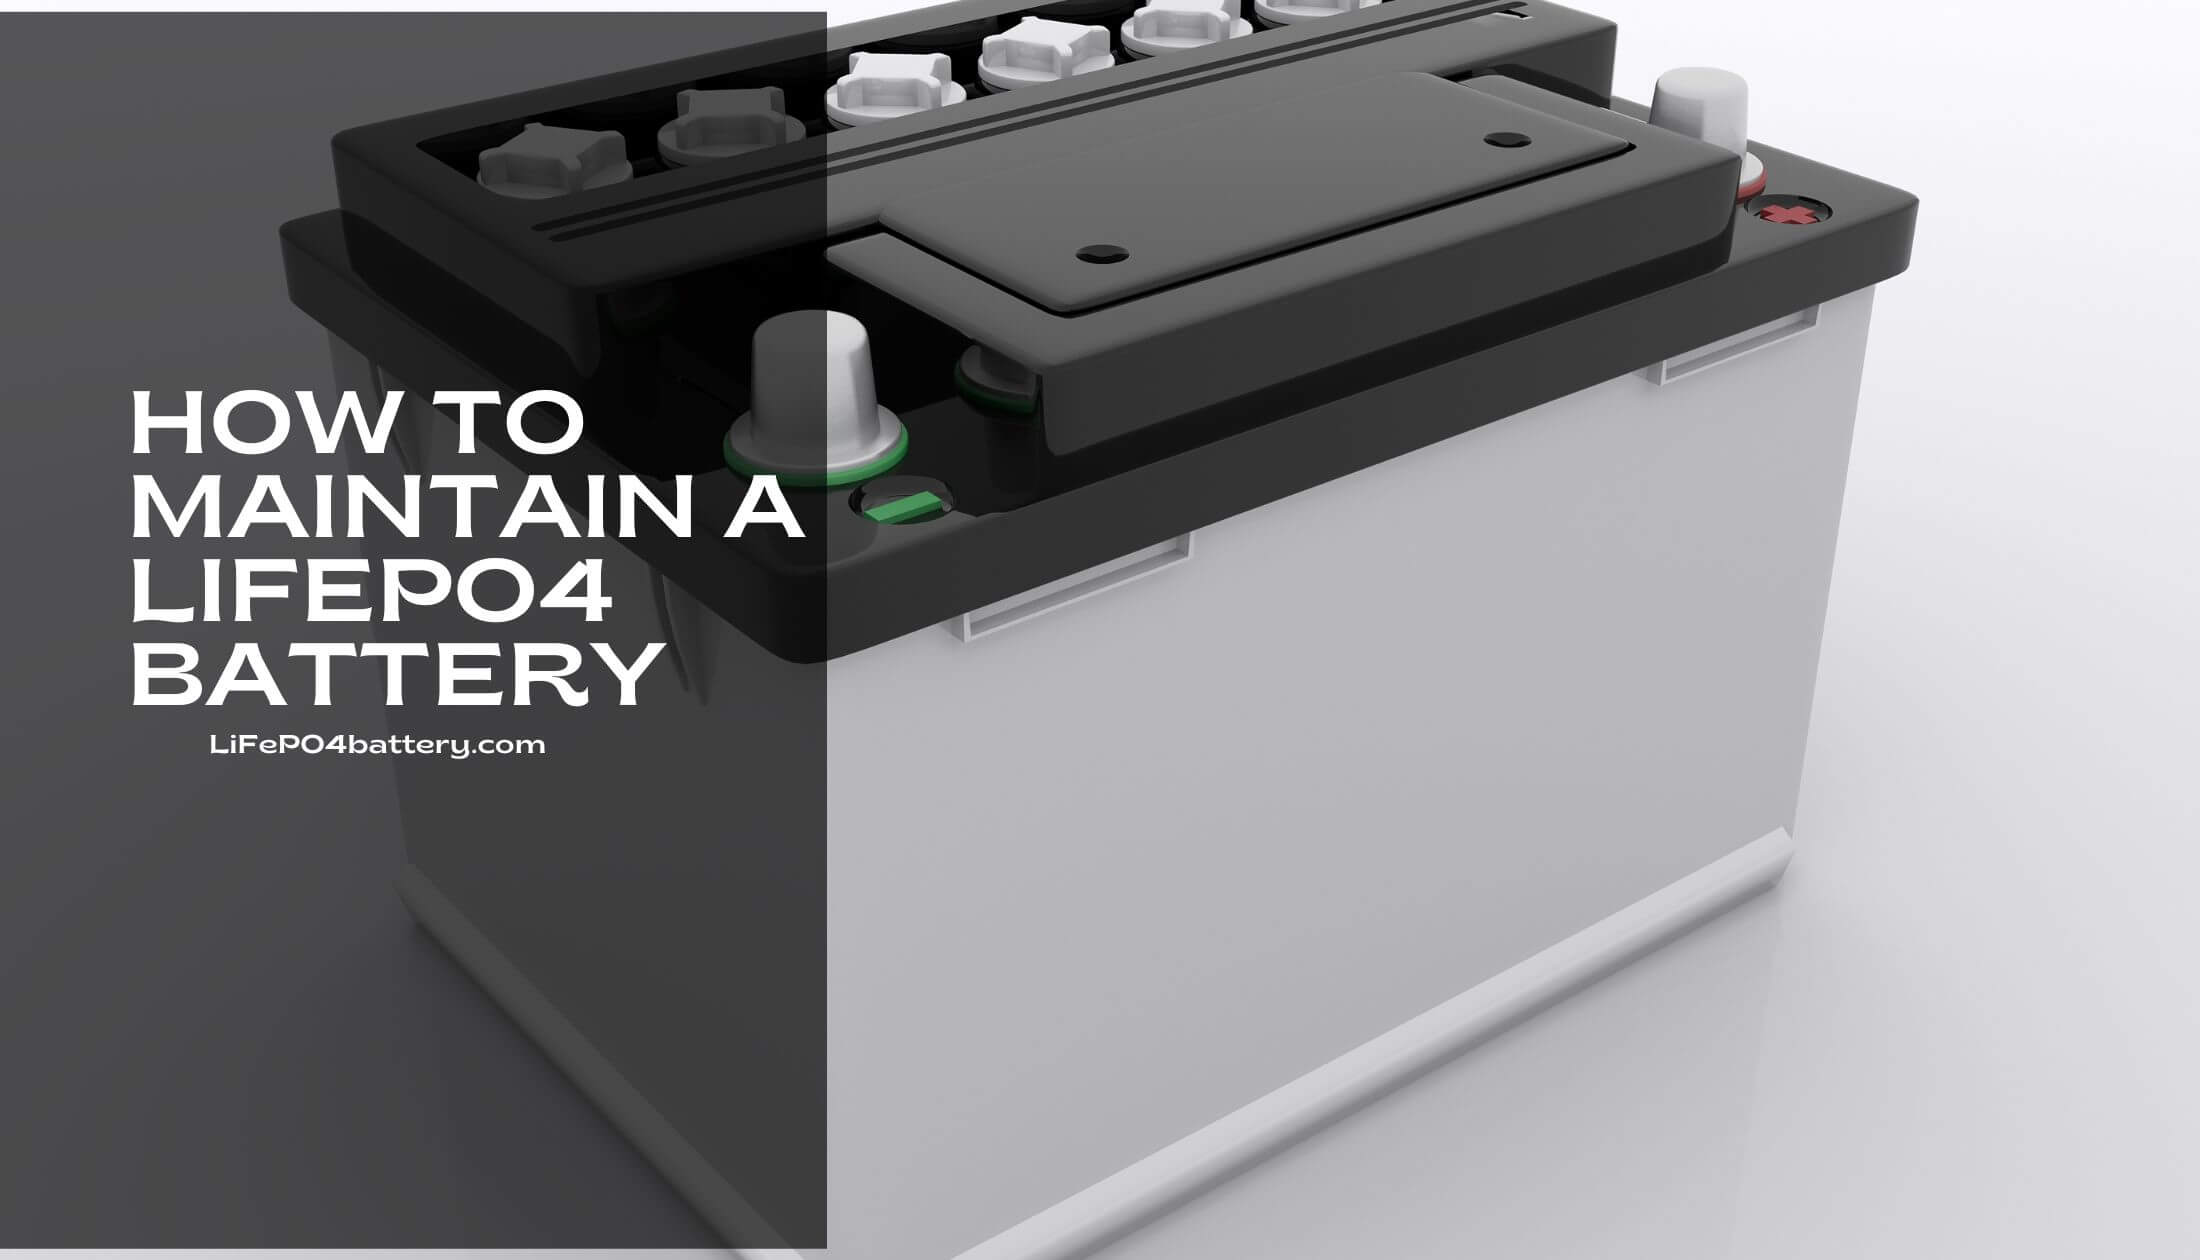 How To Maintain a Lifepo4 Battery (1)